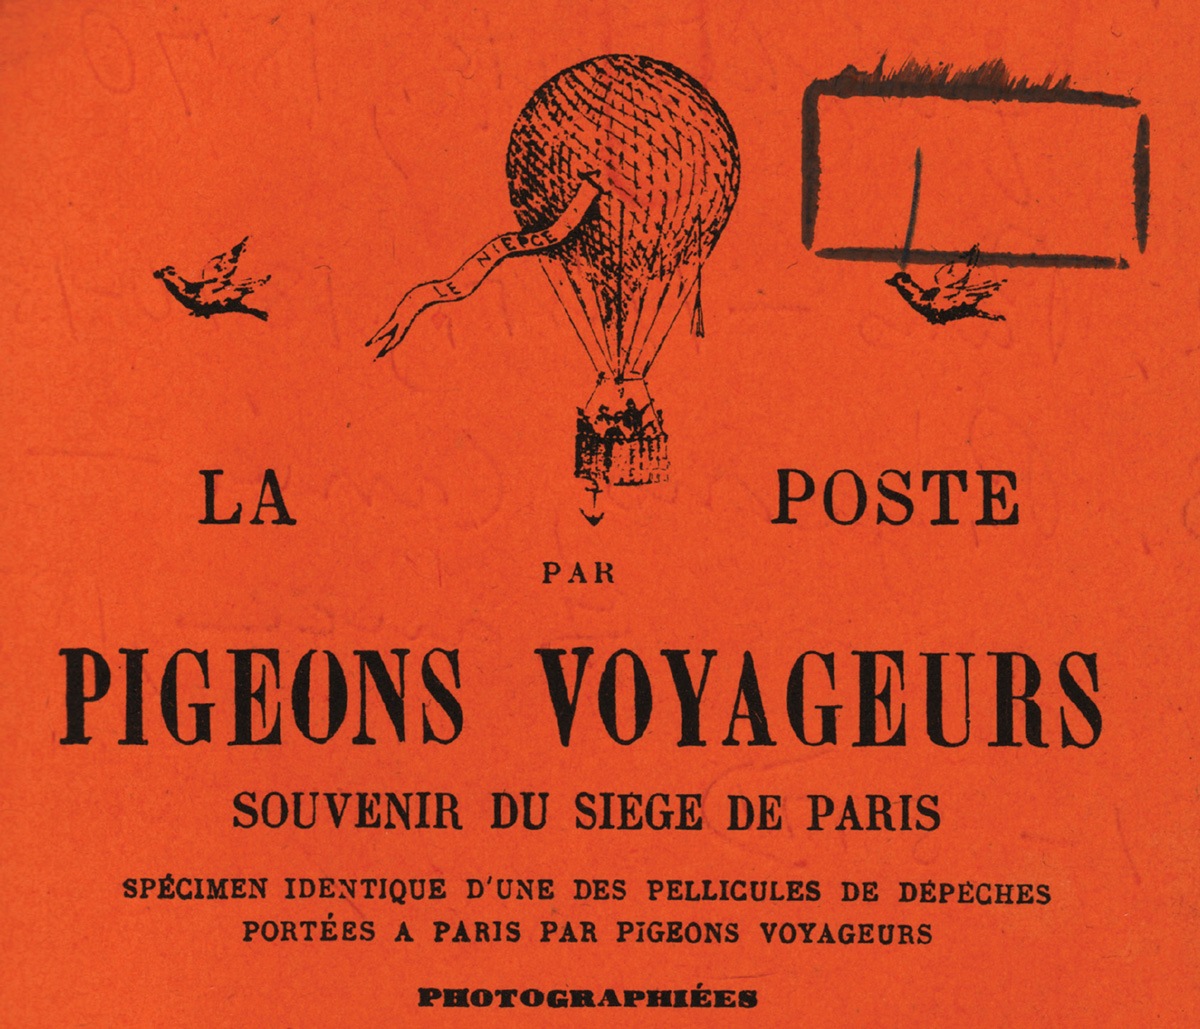 A piece of paper promoting souvenir copies of microphotographs that had been transported by pigeon mail during the eighteen seventy siege of Paris.